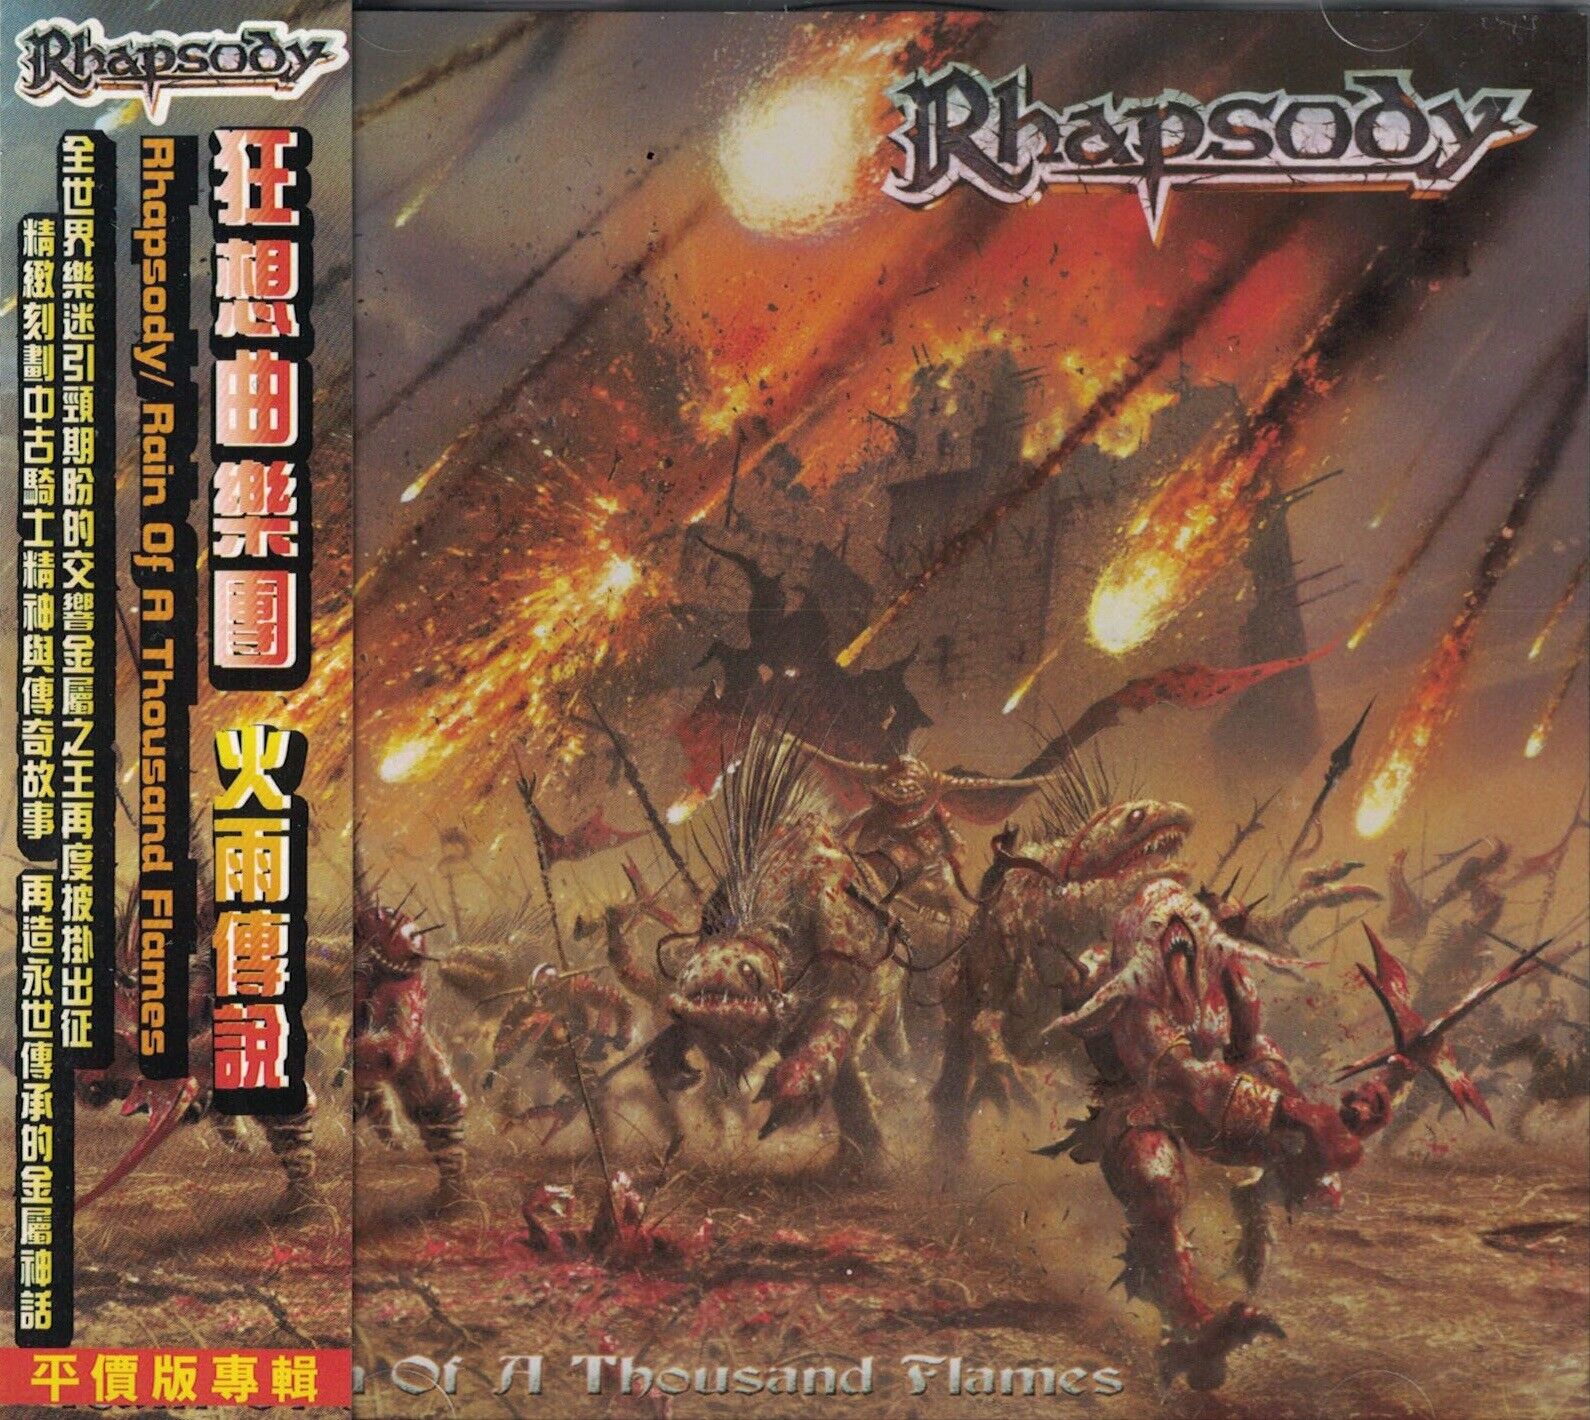 RHAPSODY - Rain Of A Thousand Flames CD 2001 Asia Luca Turilli Ancient Bards